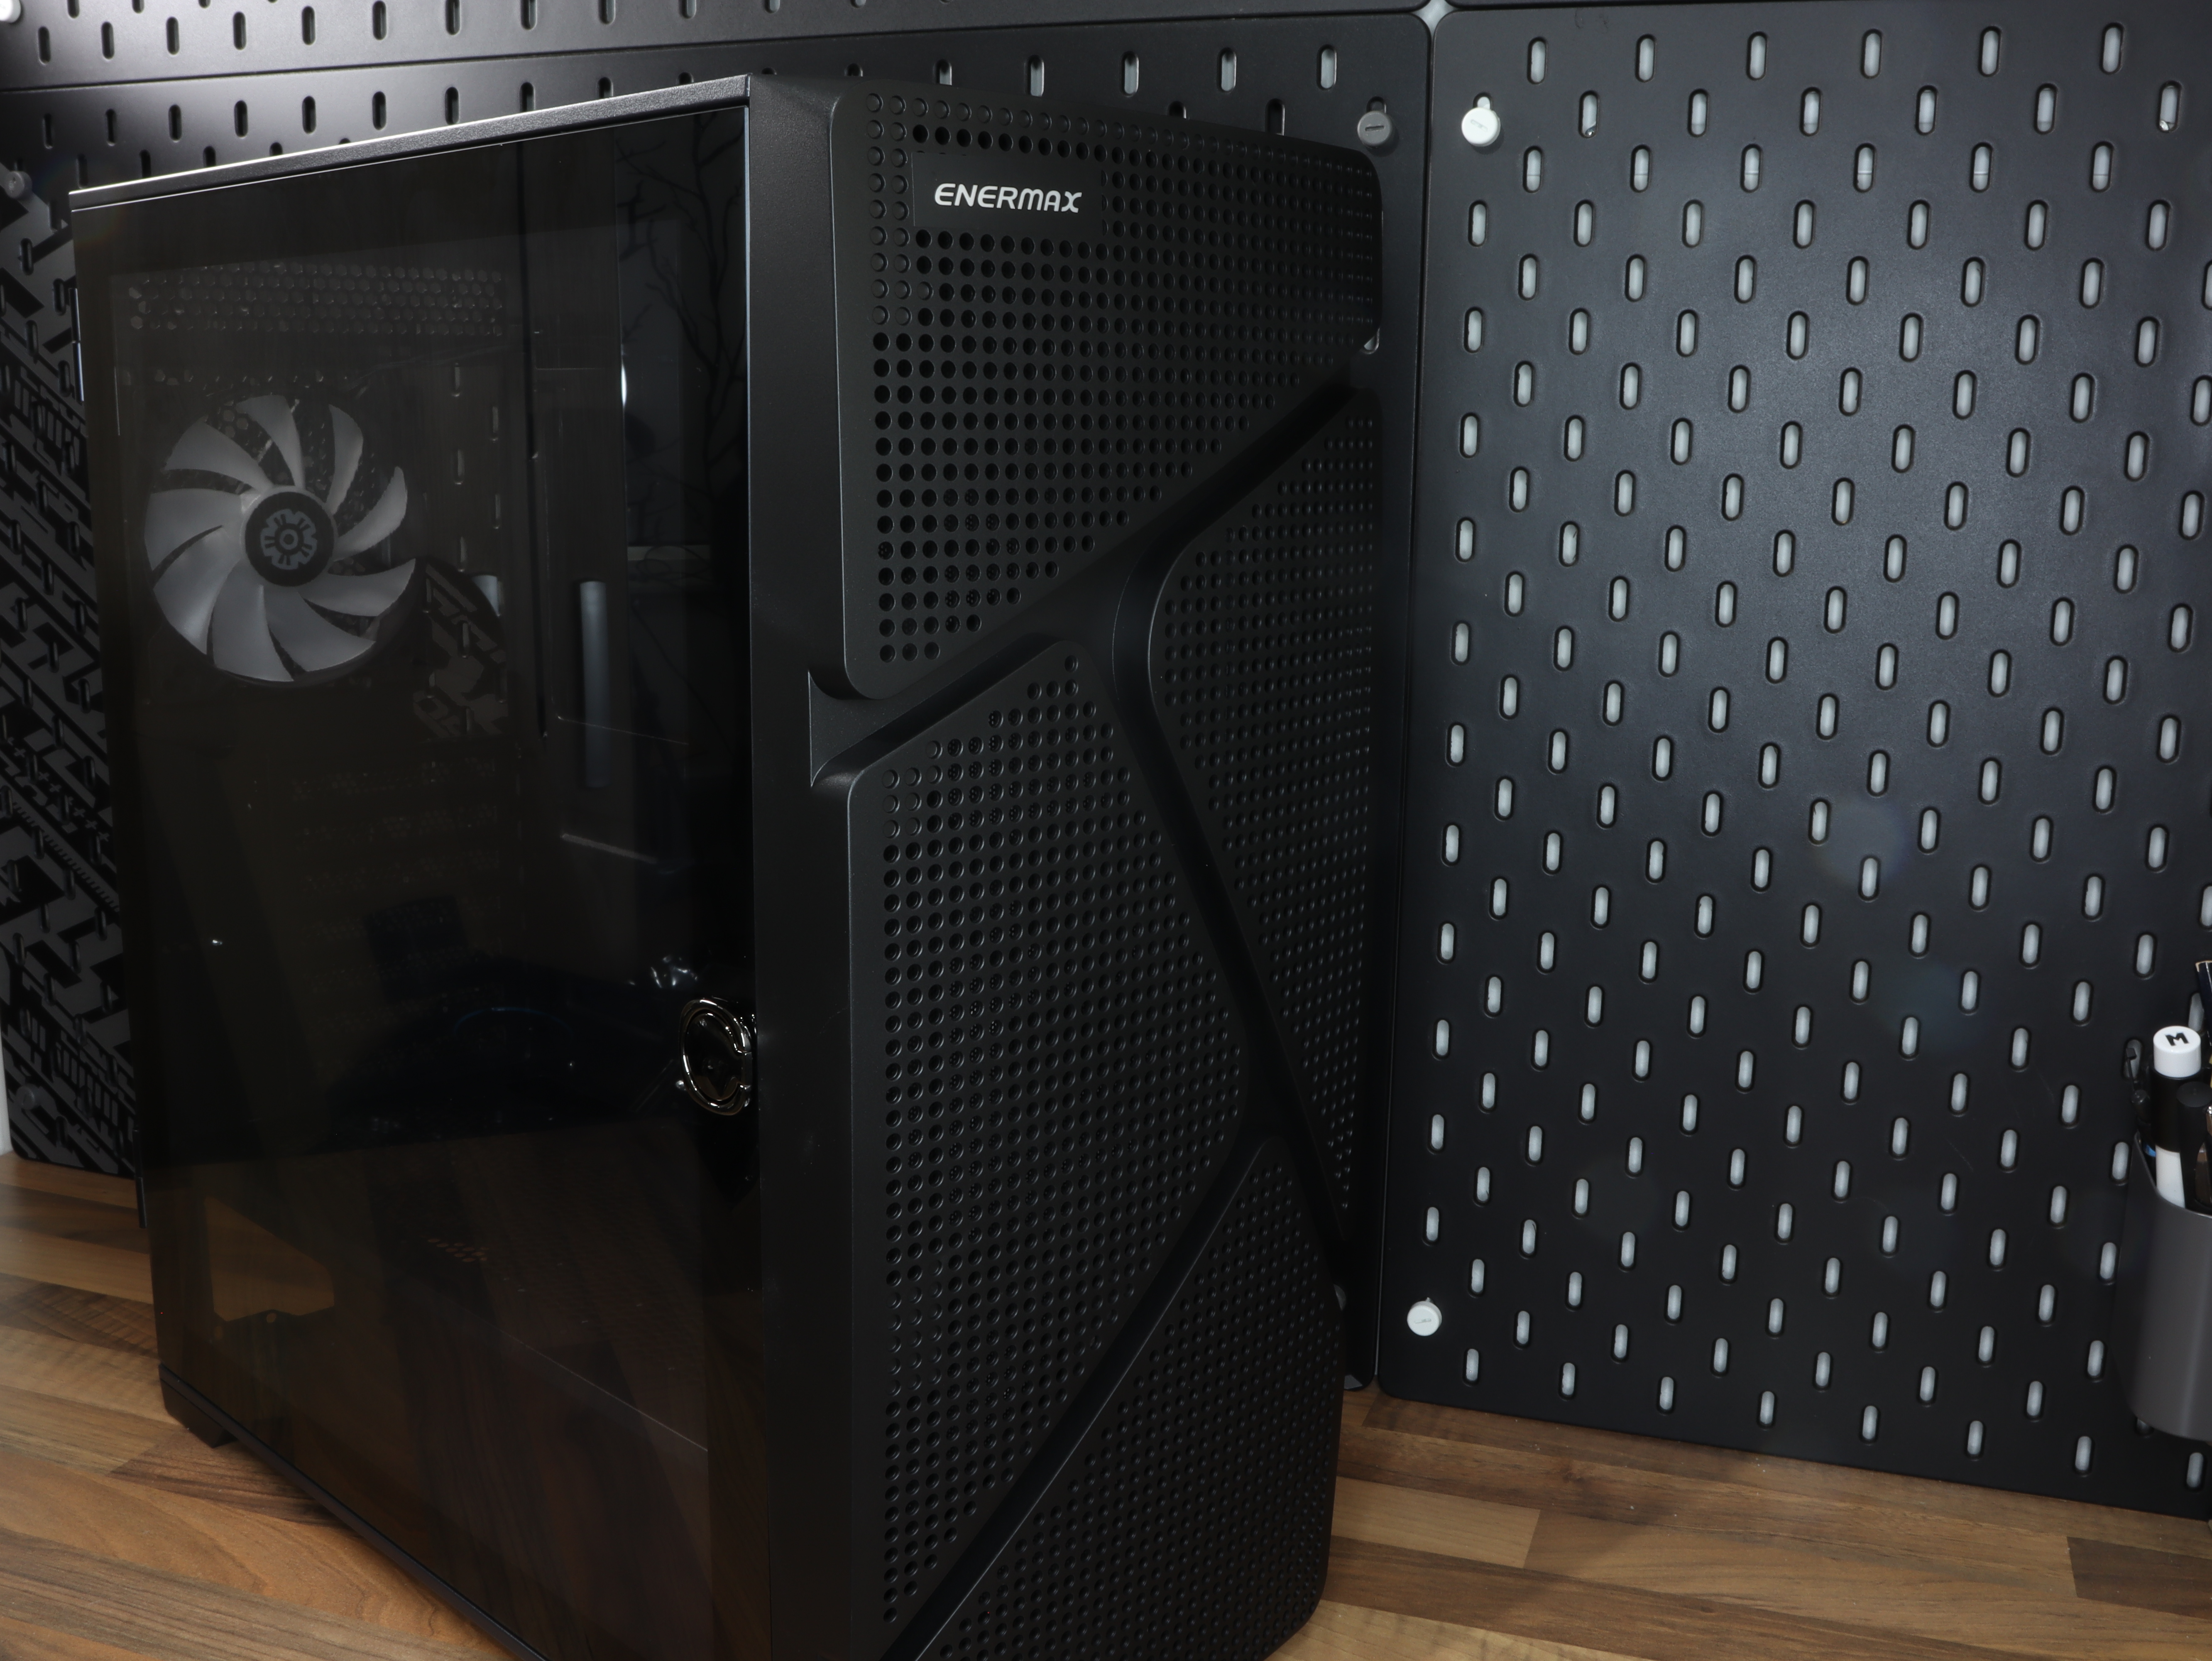 MarbleShell PC 420mm Tempered Glass Enermax MS31 Case glass RGB Tempered Mid-Tower ATX.JPG